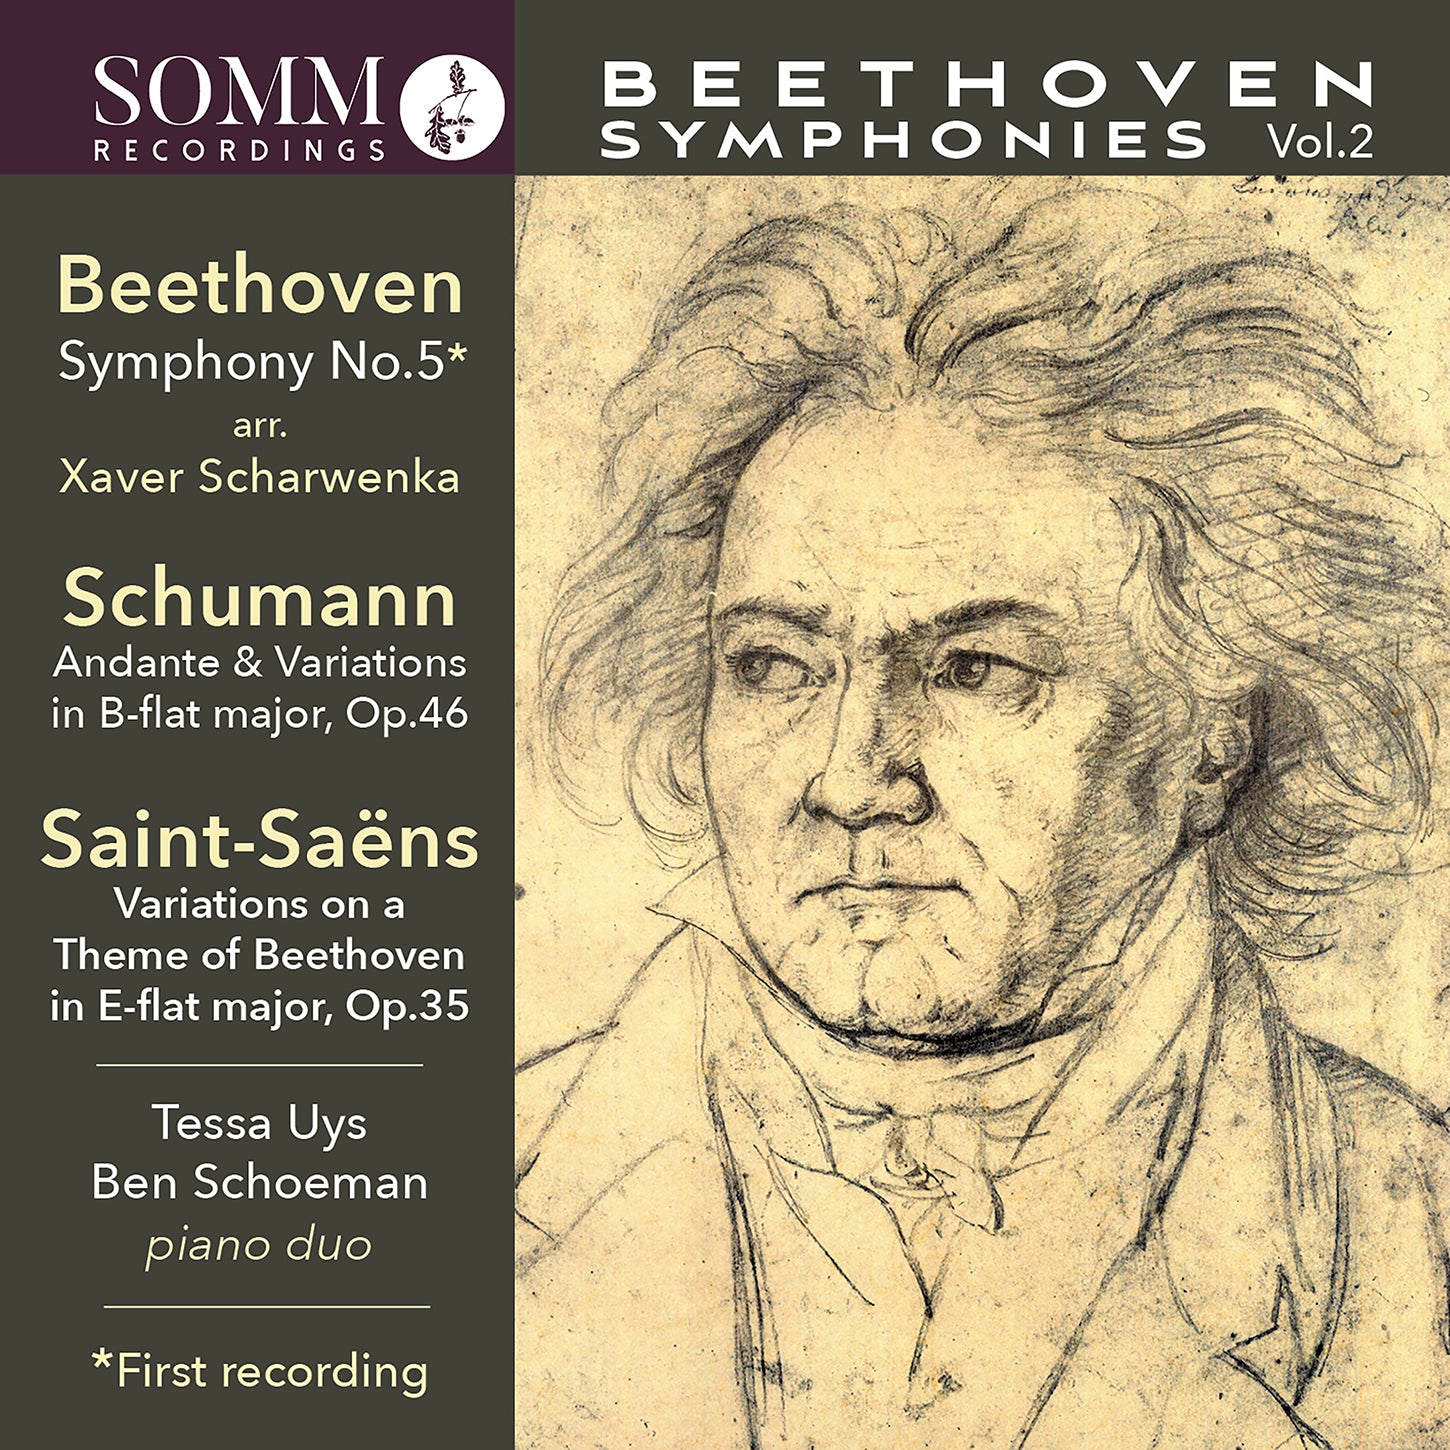 Beethoven, R. Schumann, Saint-Saëns: Symphonies for Piano Duo vol. 2 / Uys & Schoeman